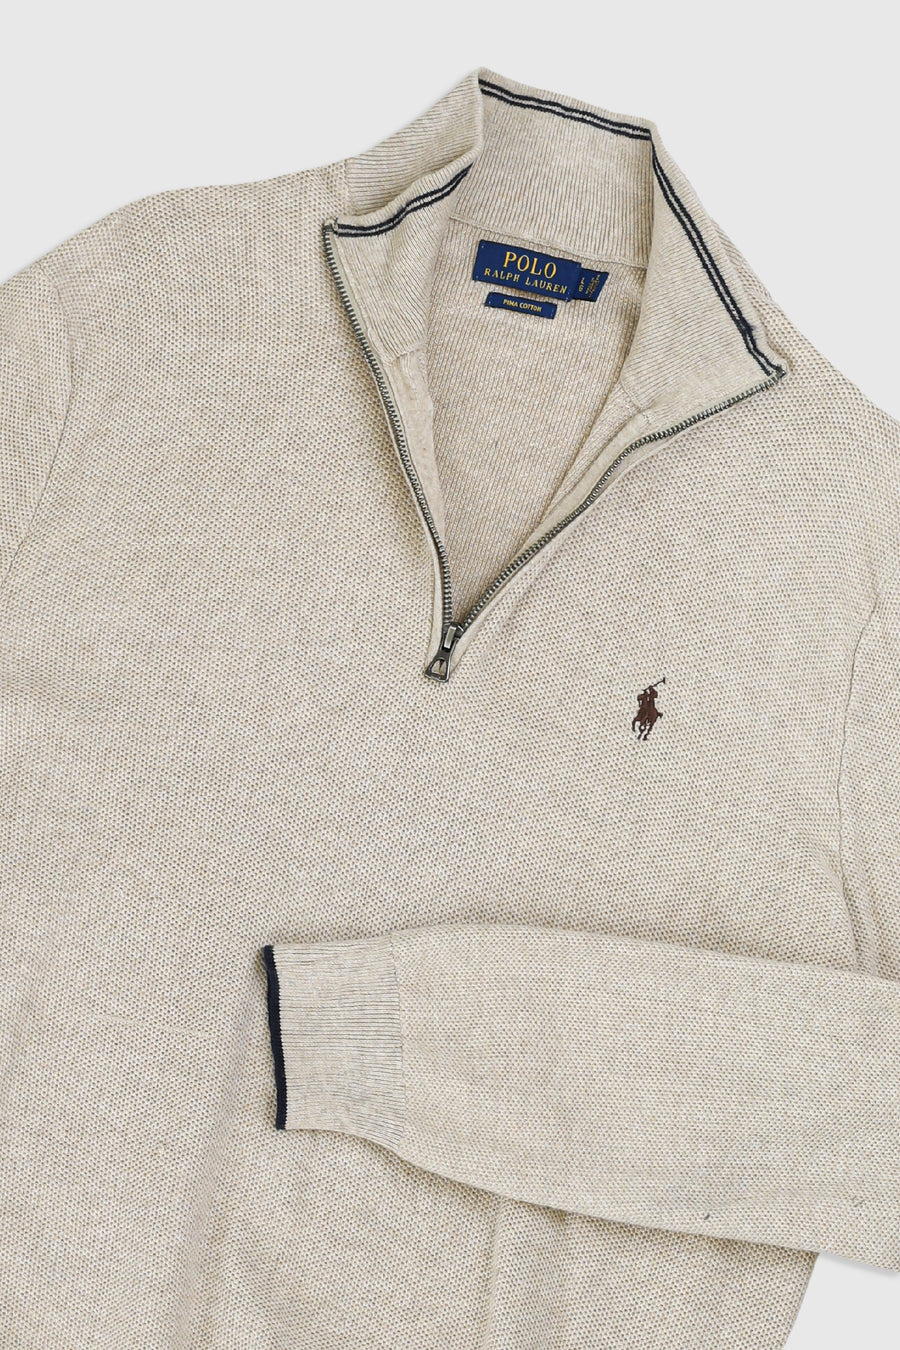 Vintage Polo 1/4 Zip Knit Sweater